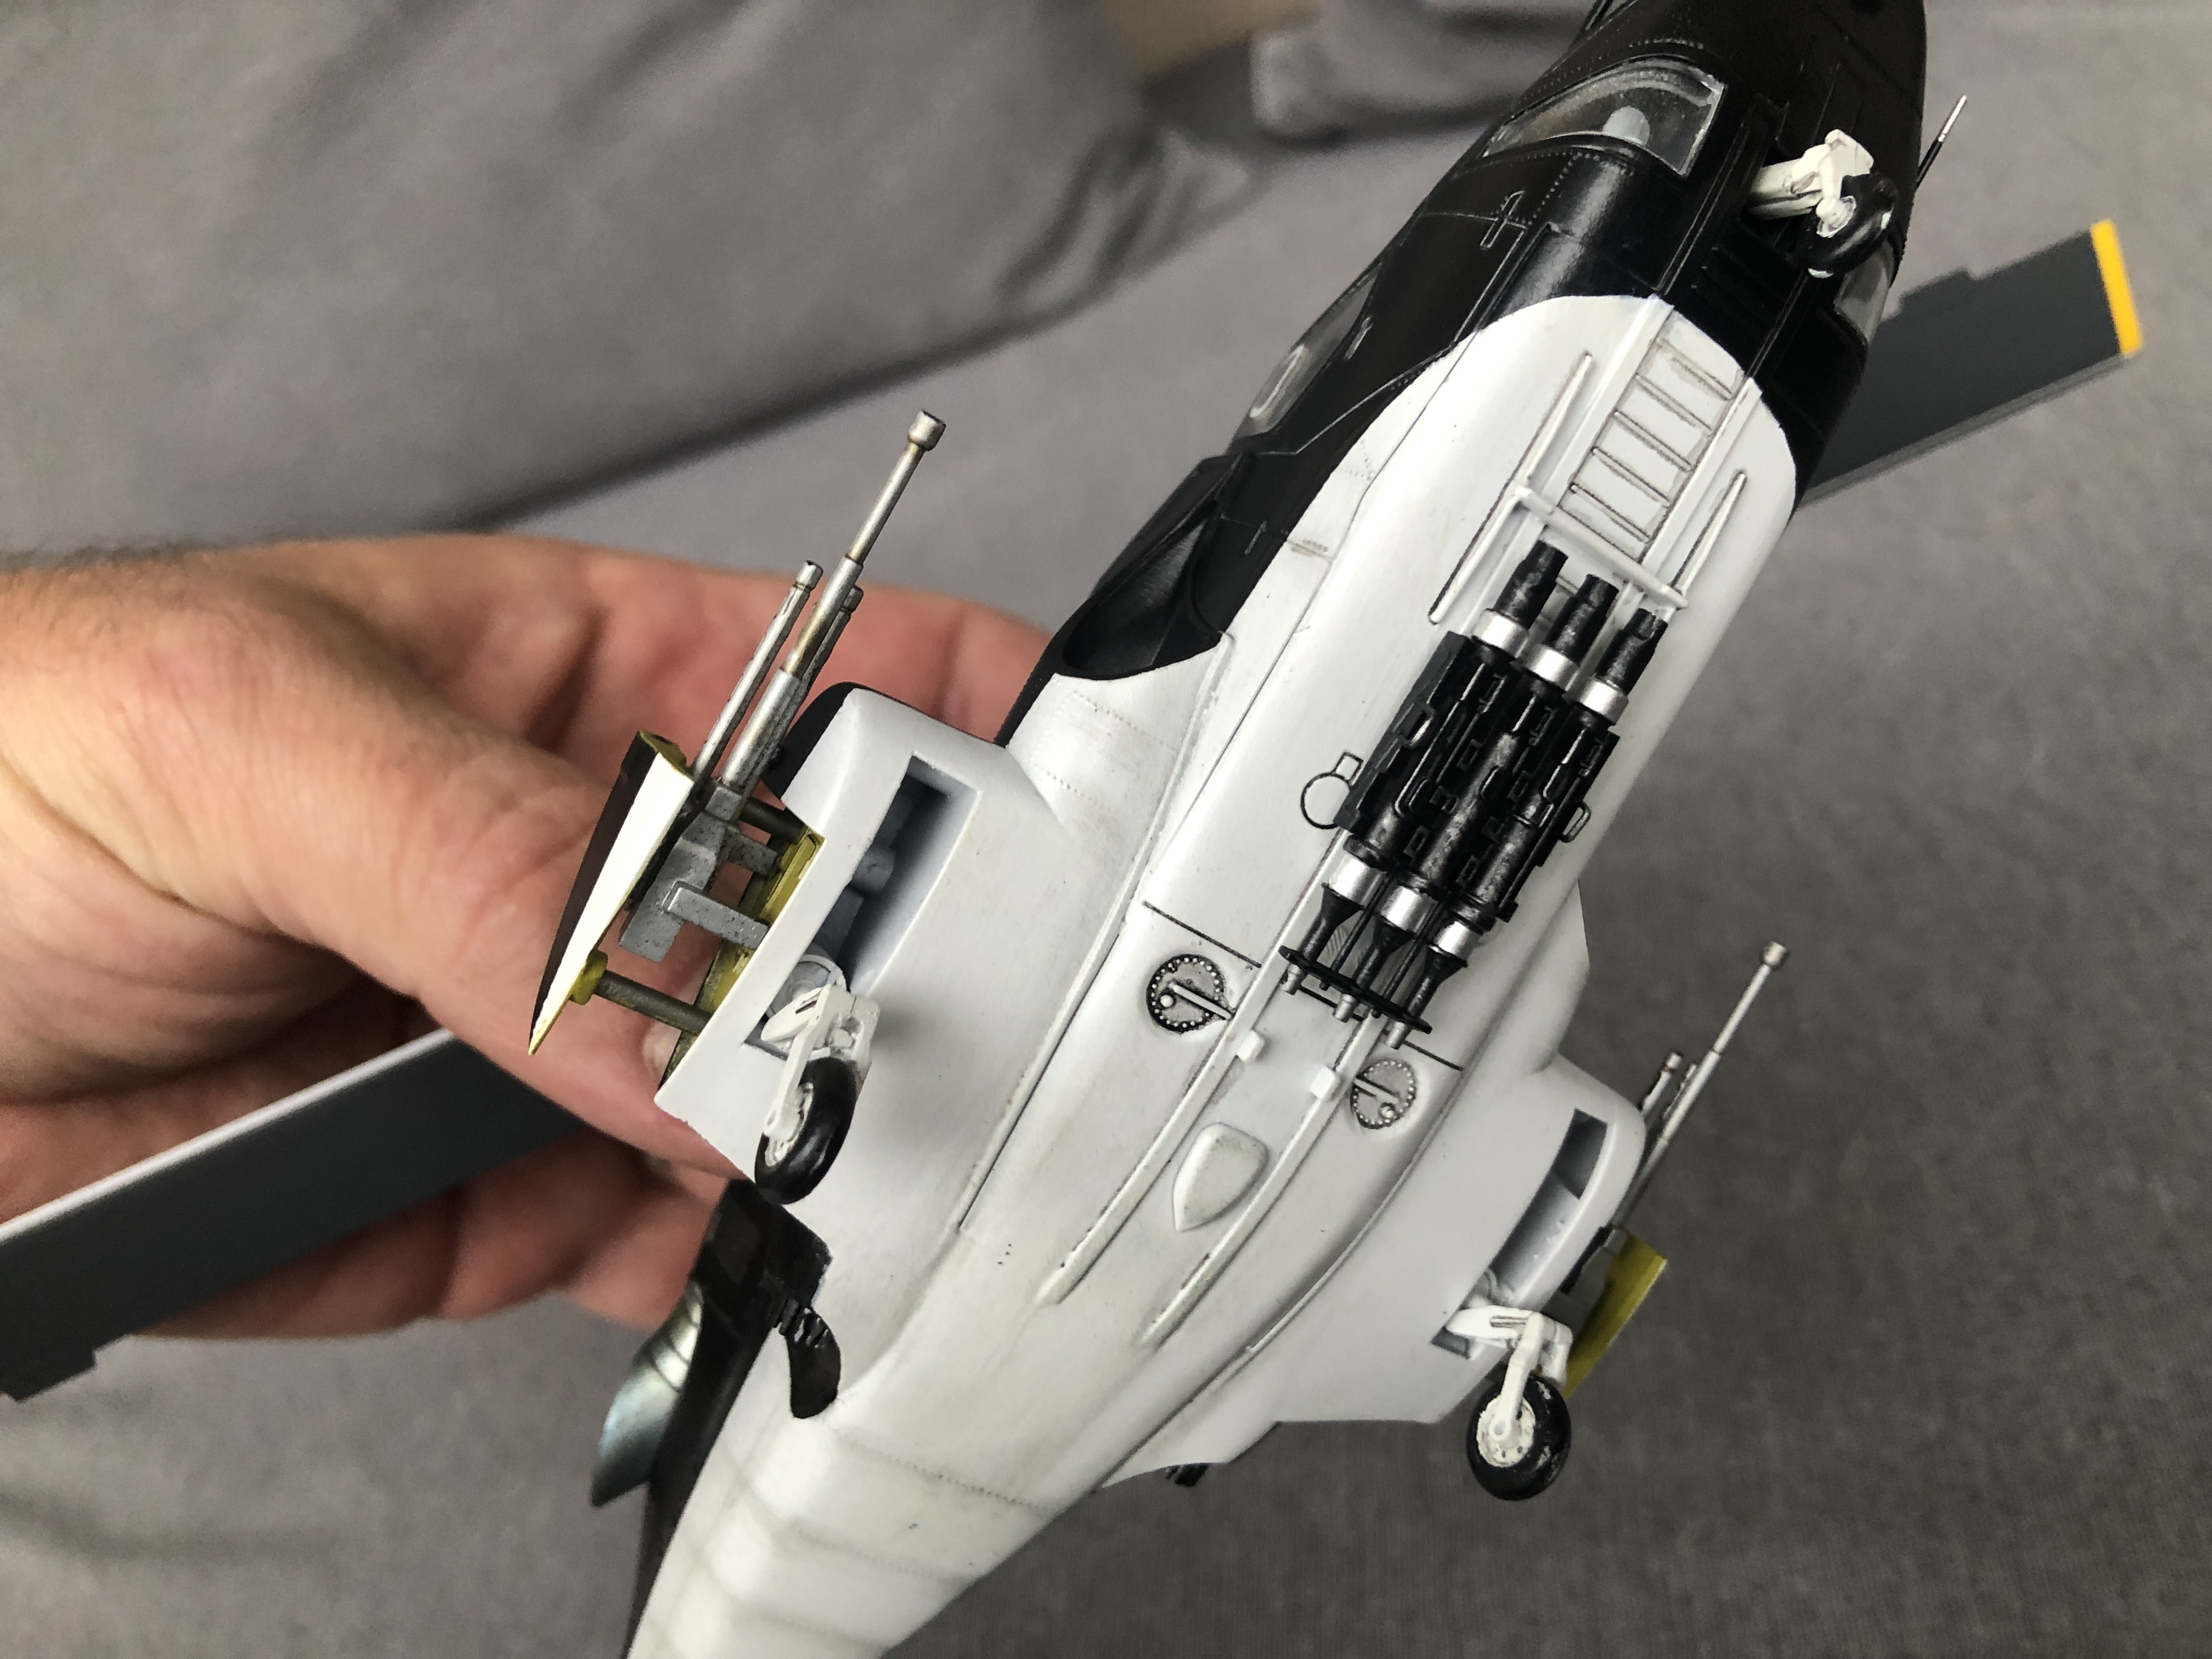 [AOSHIMA] 1/48 AIRWOLF / SUPERCOPTER 8y9q